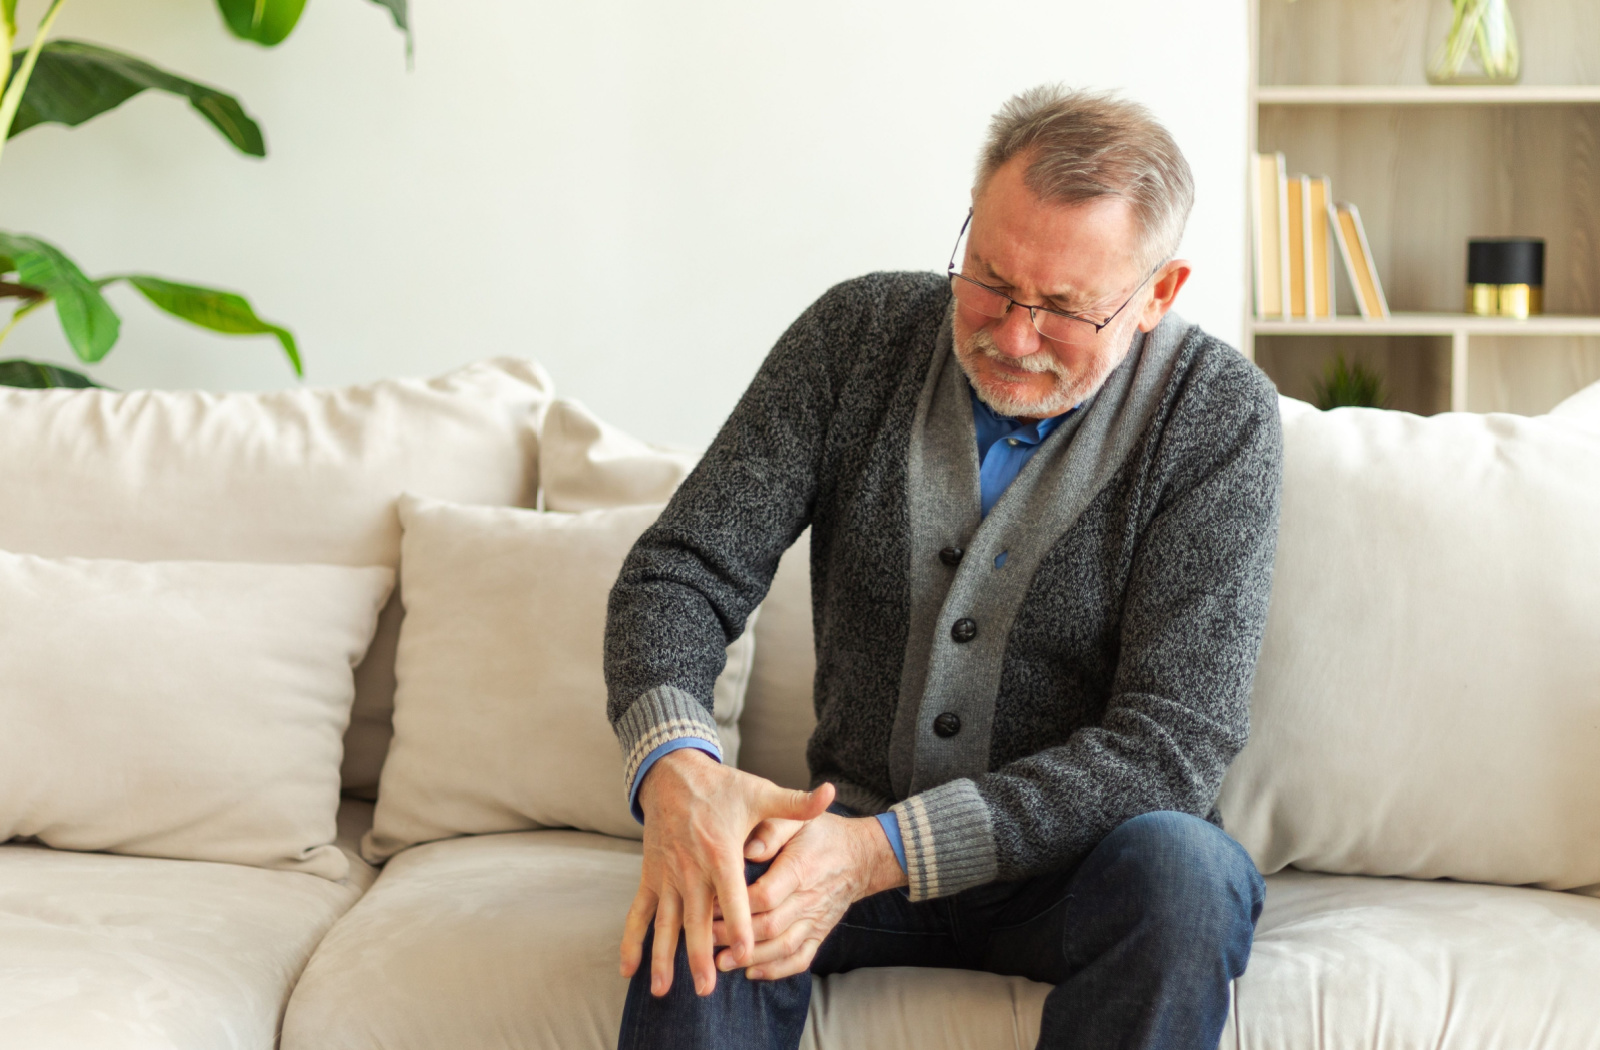 An older adult man sitting on a couch and holding his right knee due to pain
